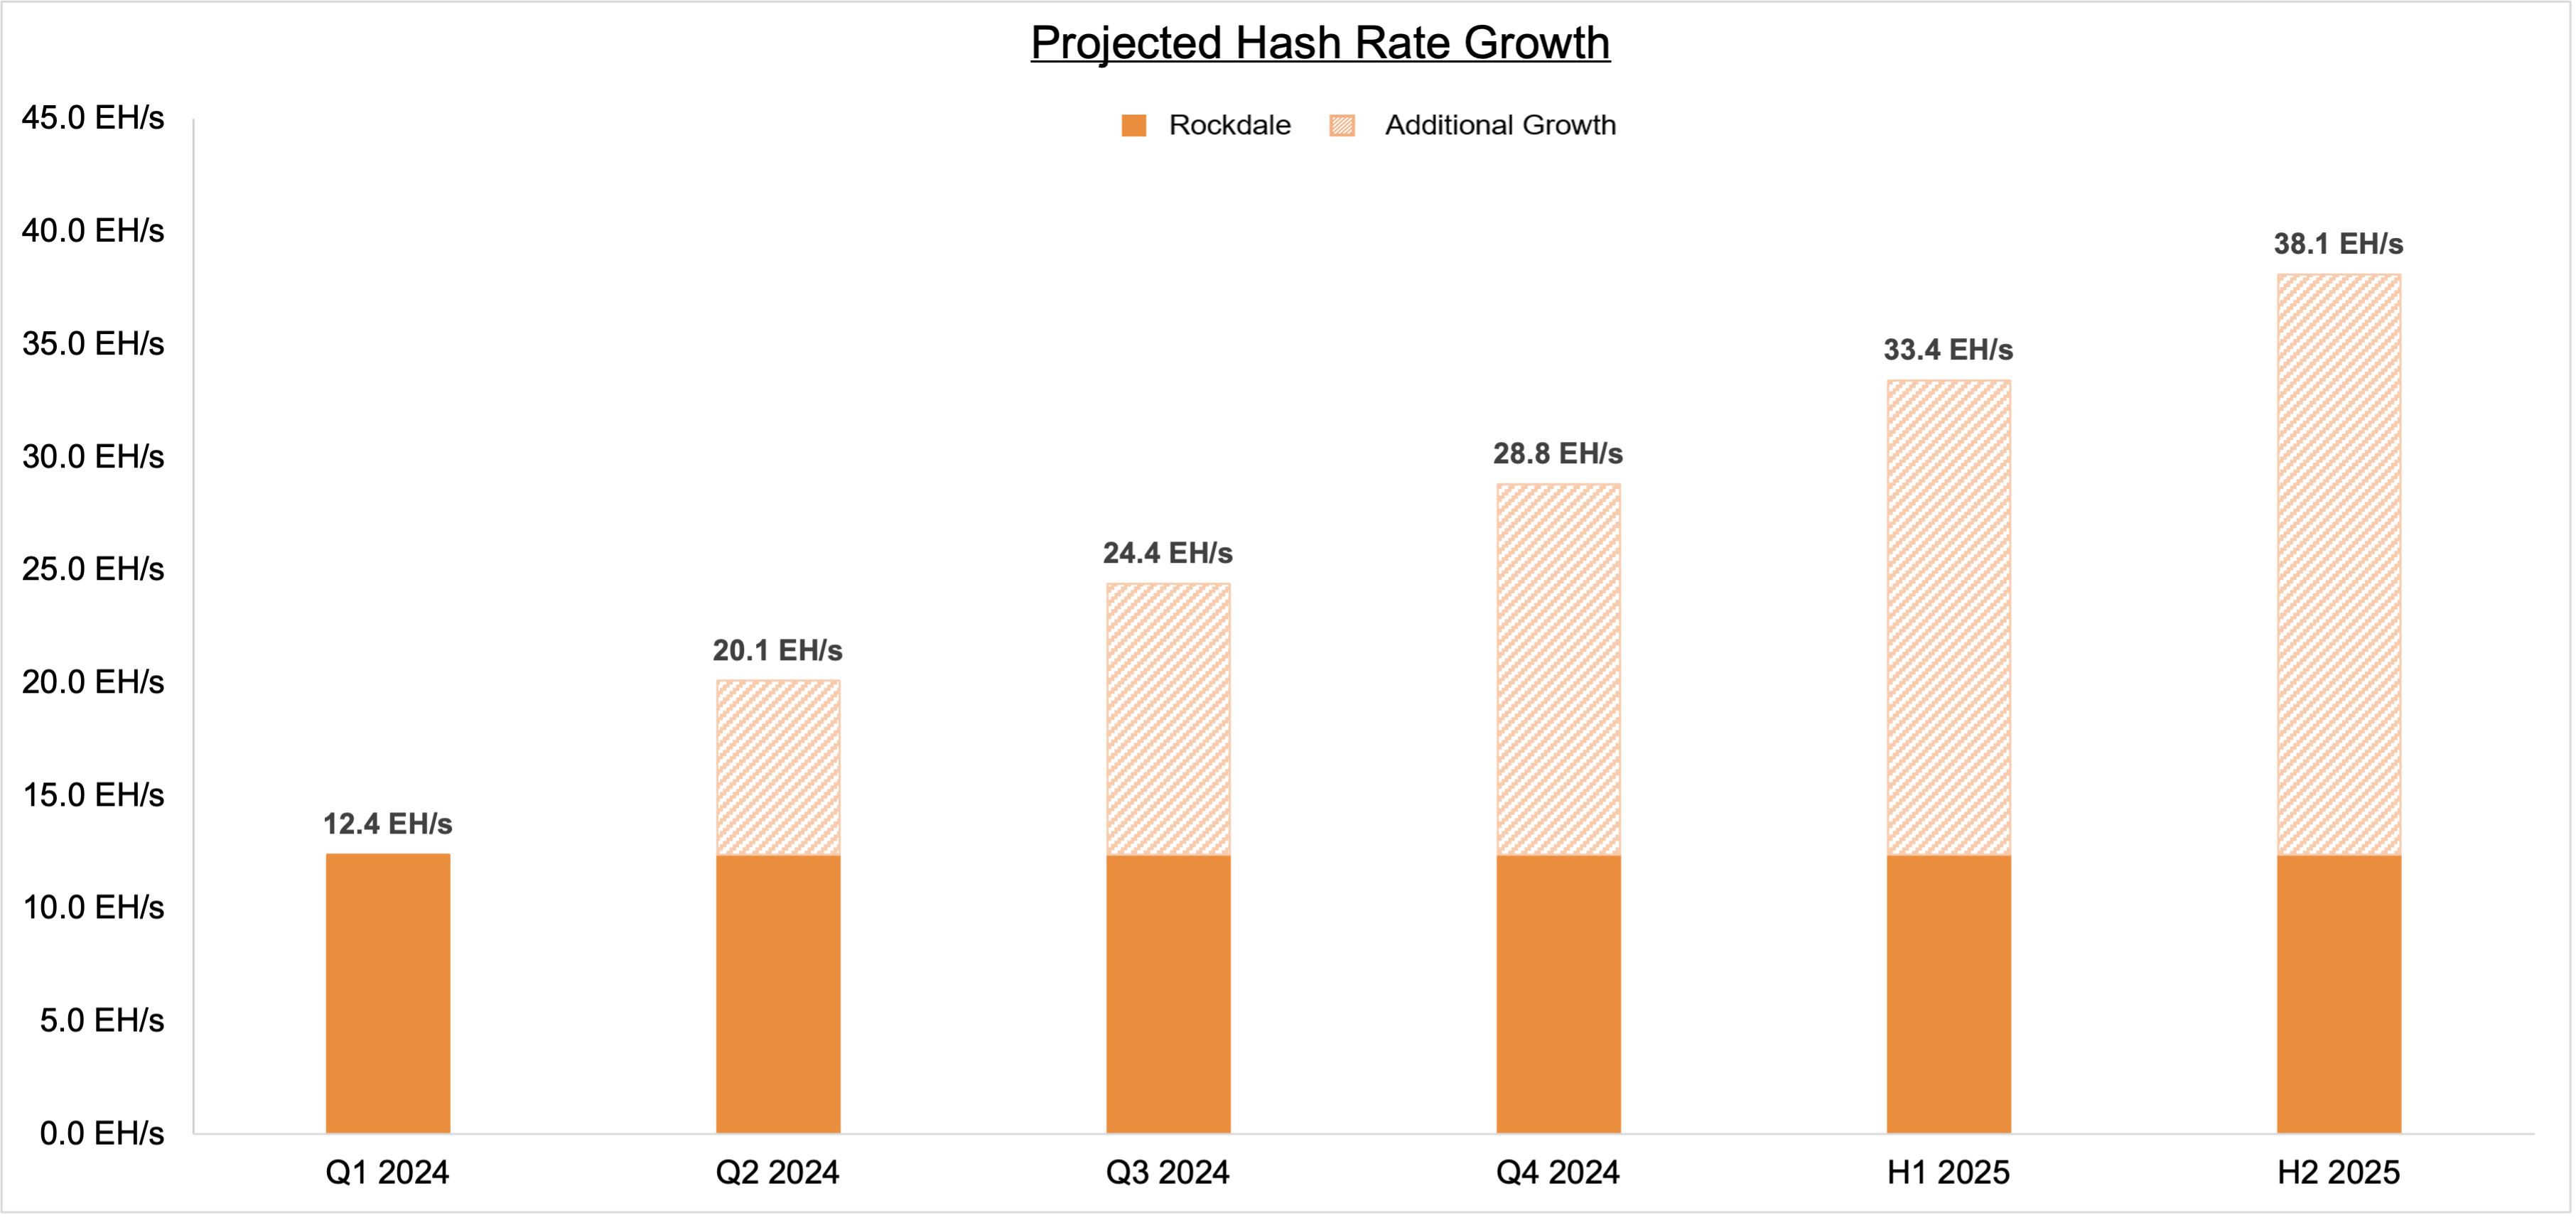 Estimated Hash Rate Growth